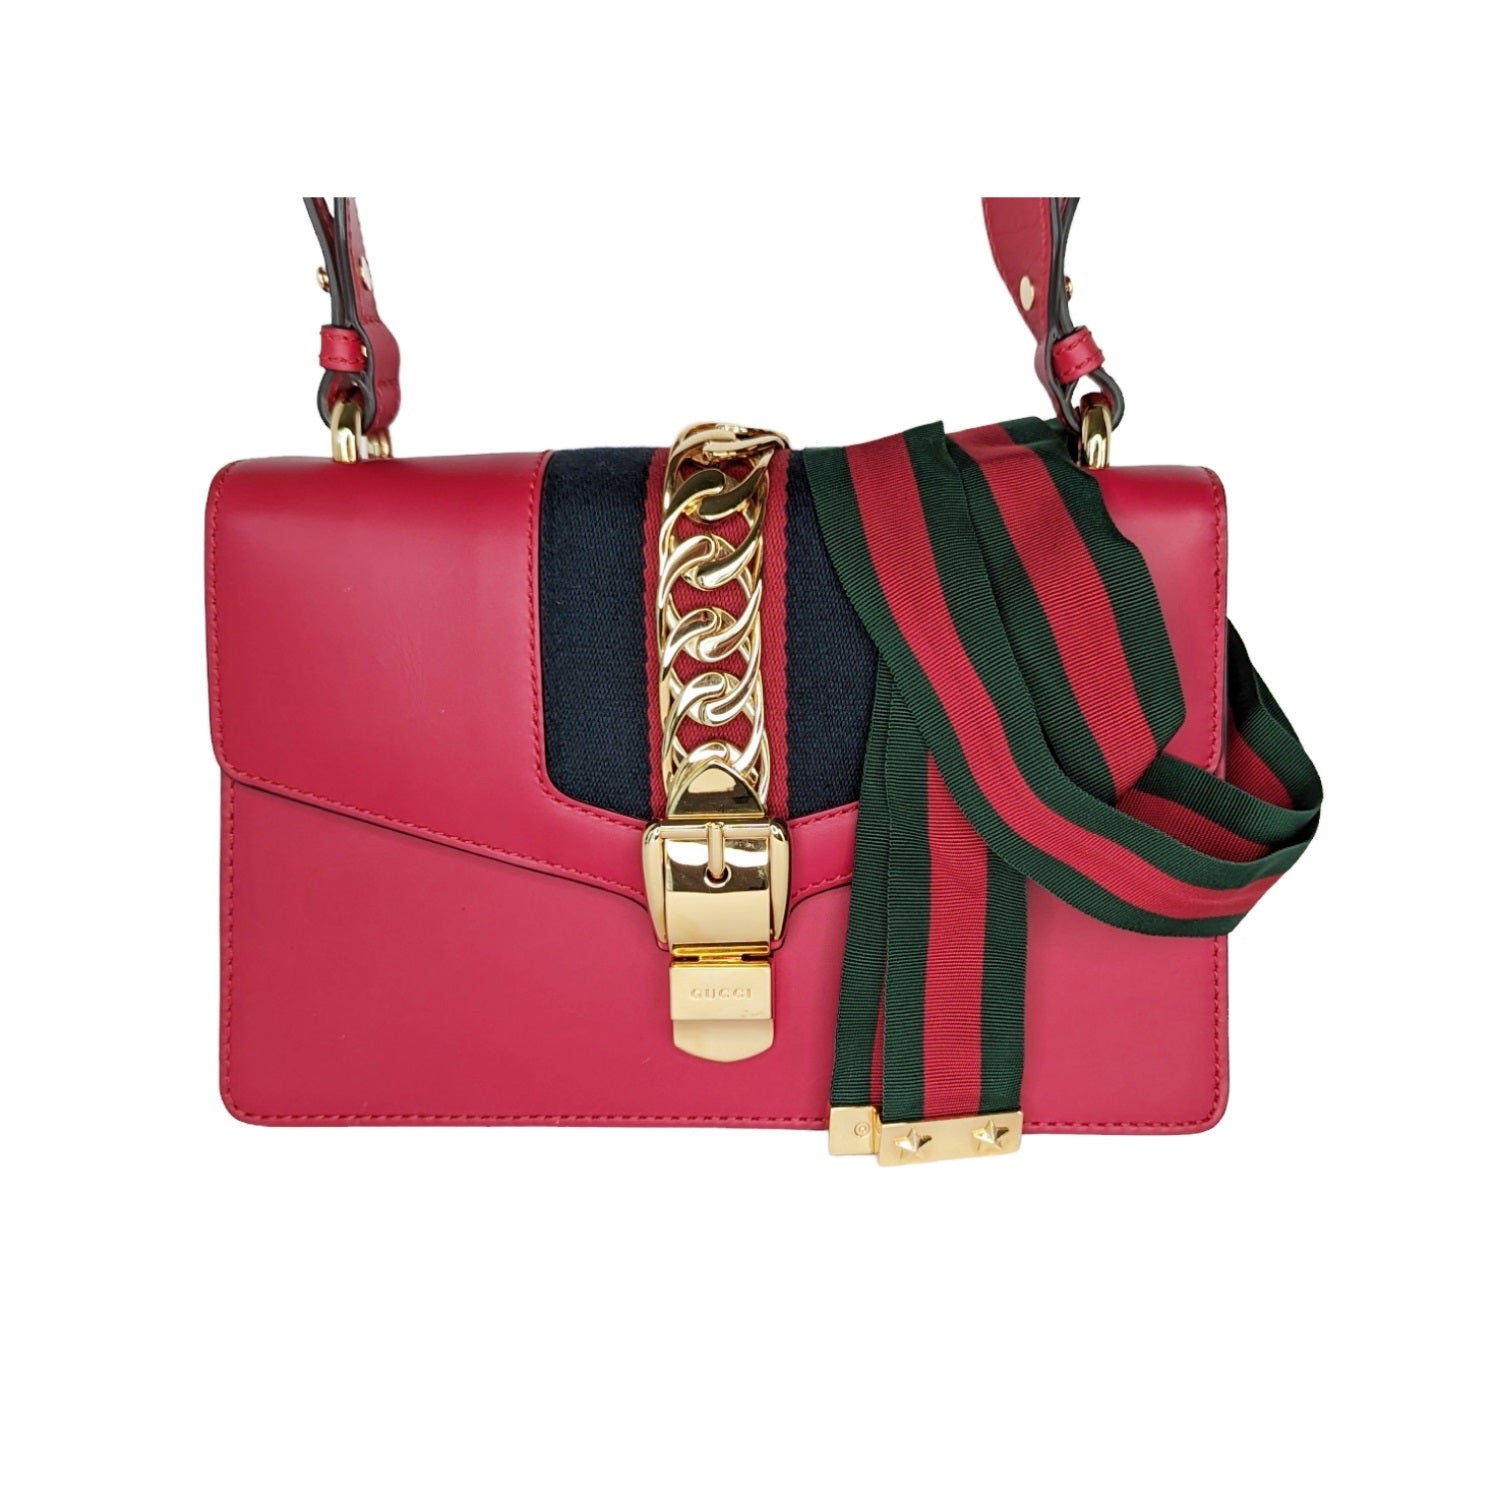 Gucci Calfskin Small Sylvie Chain Shoulder Bag Hibiscus Red - TheRelux.com